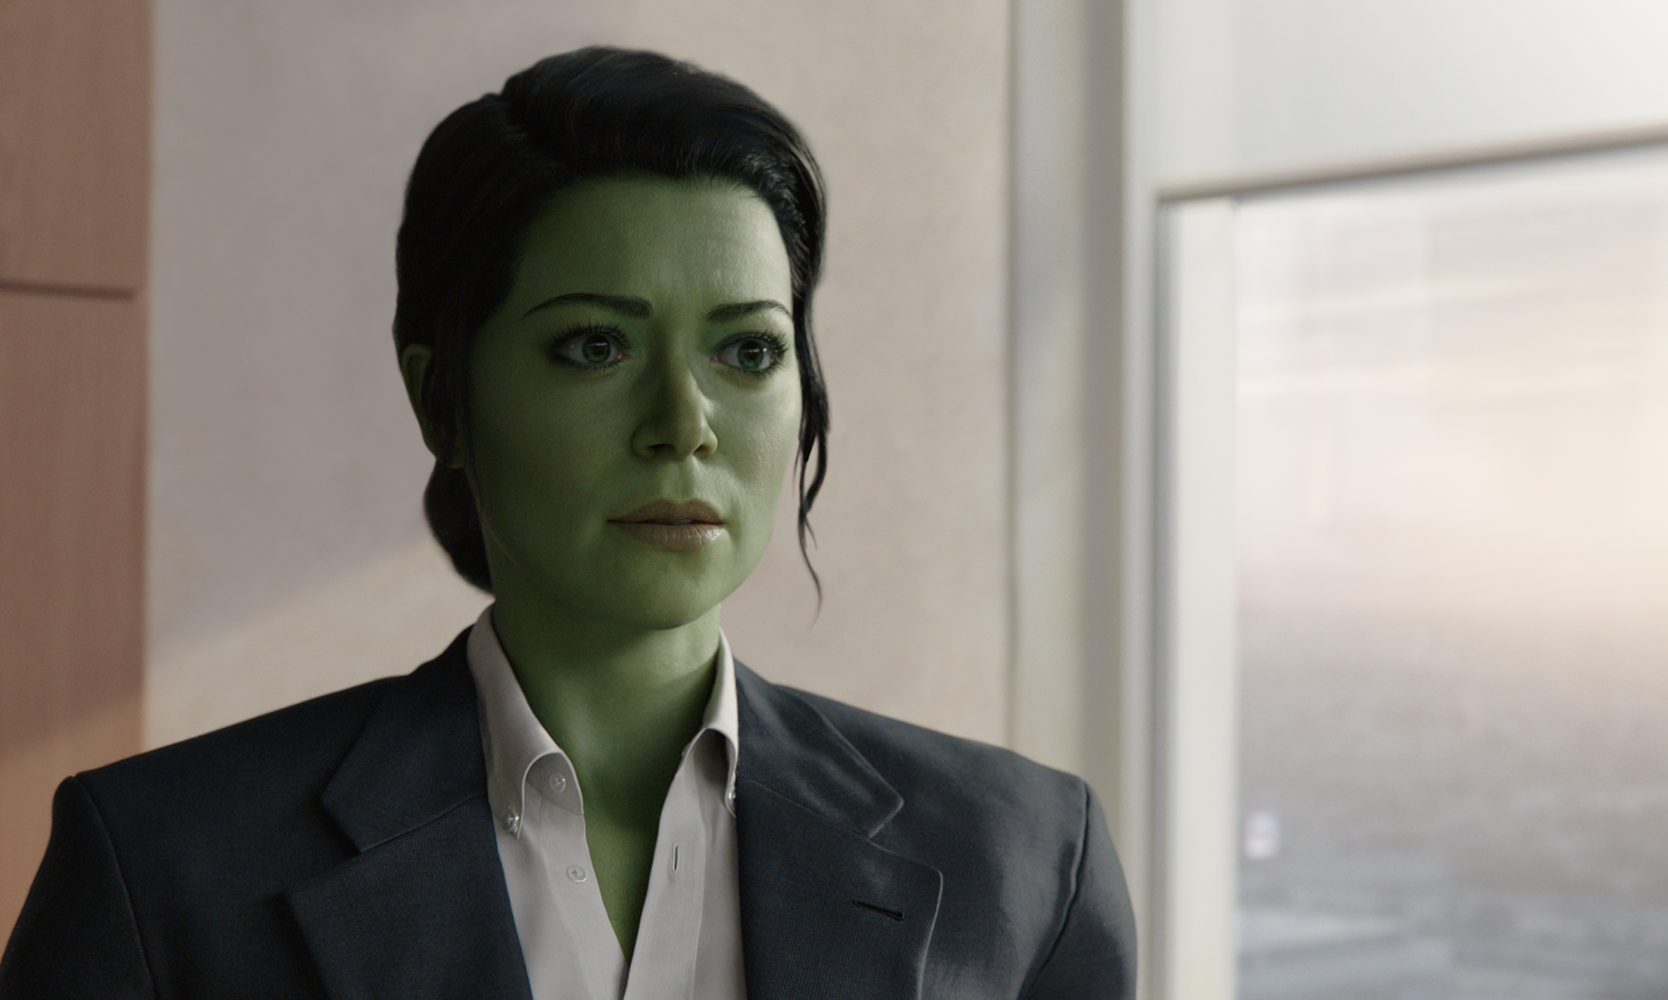 She hulk attorney at law